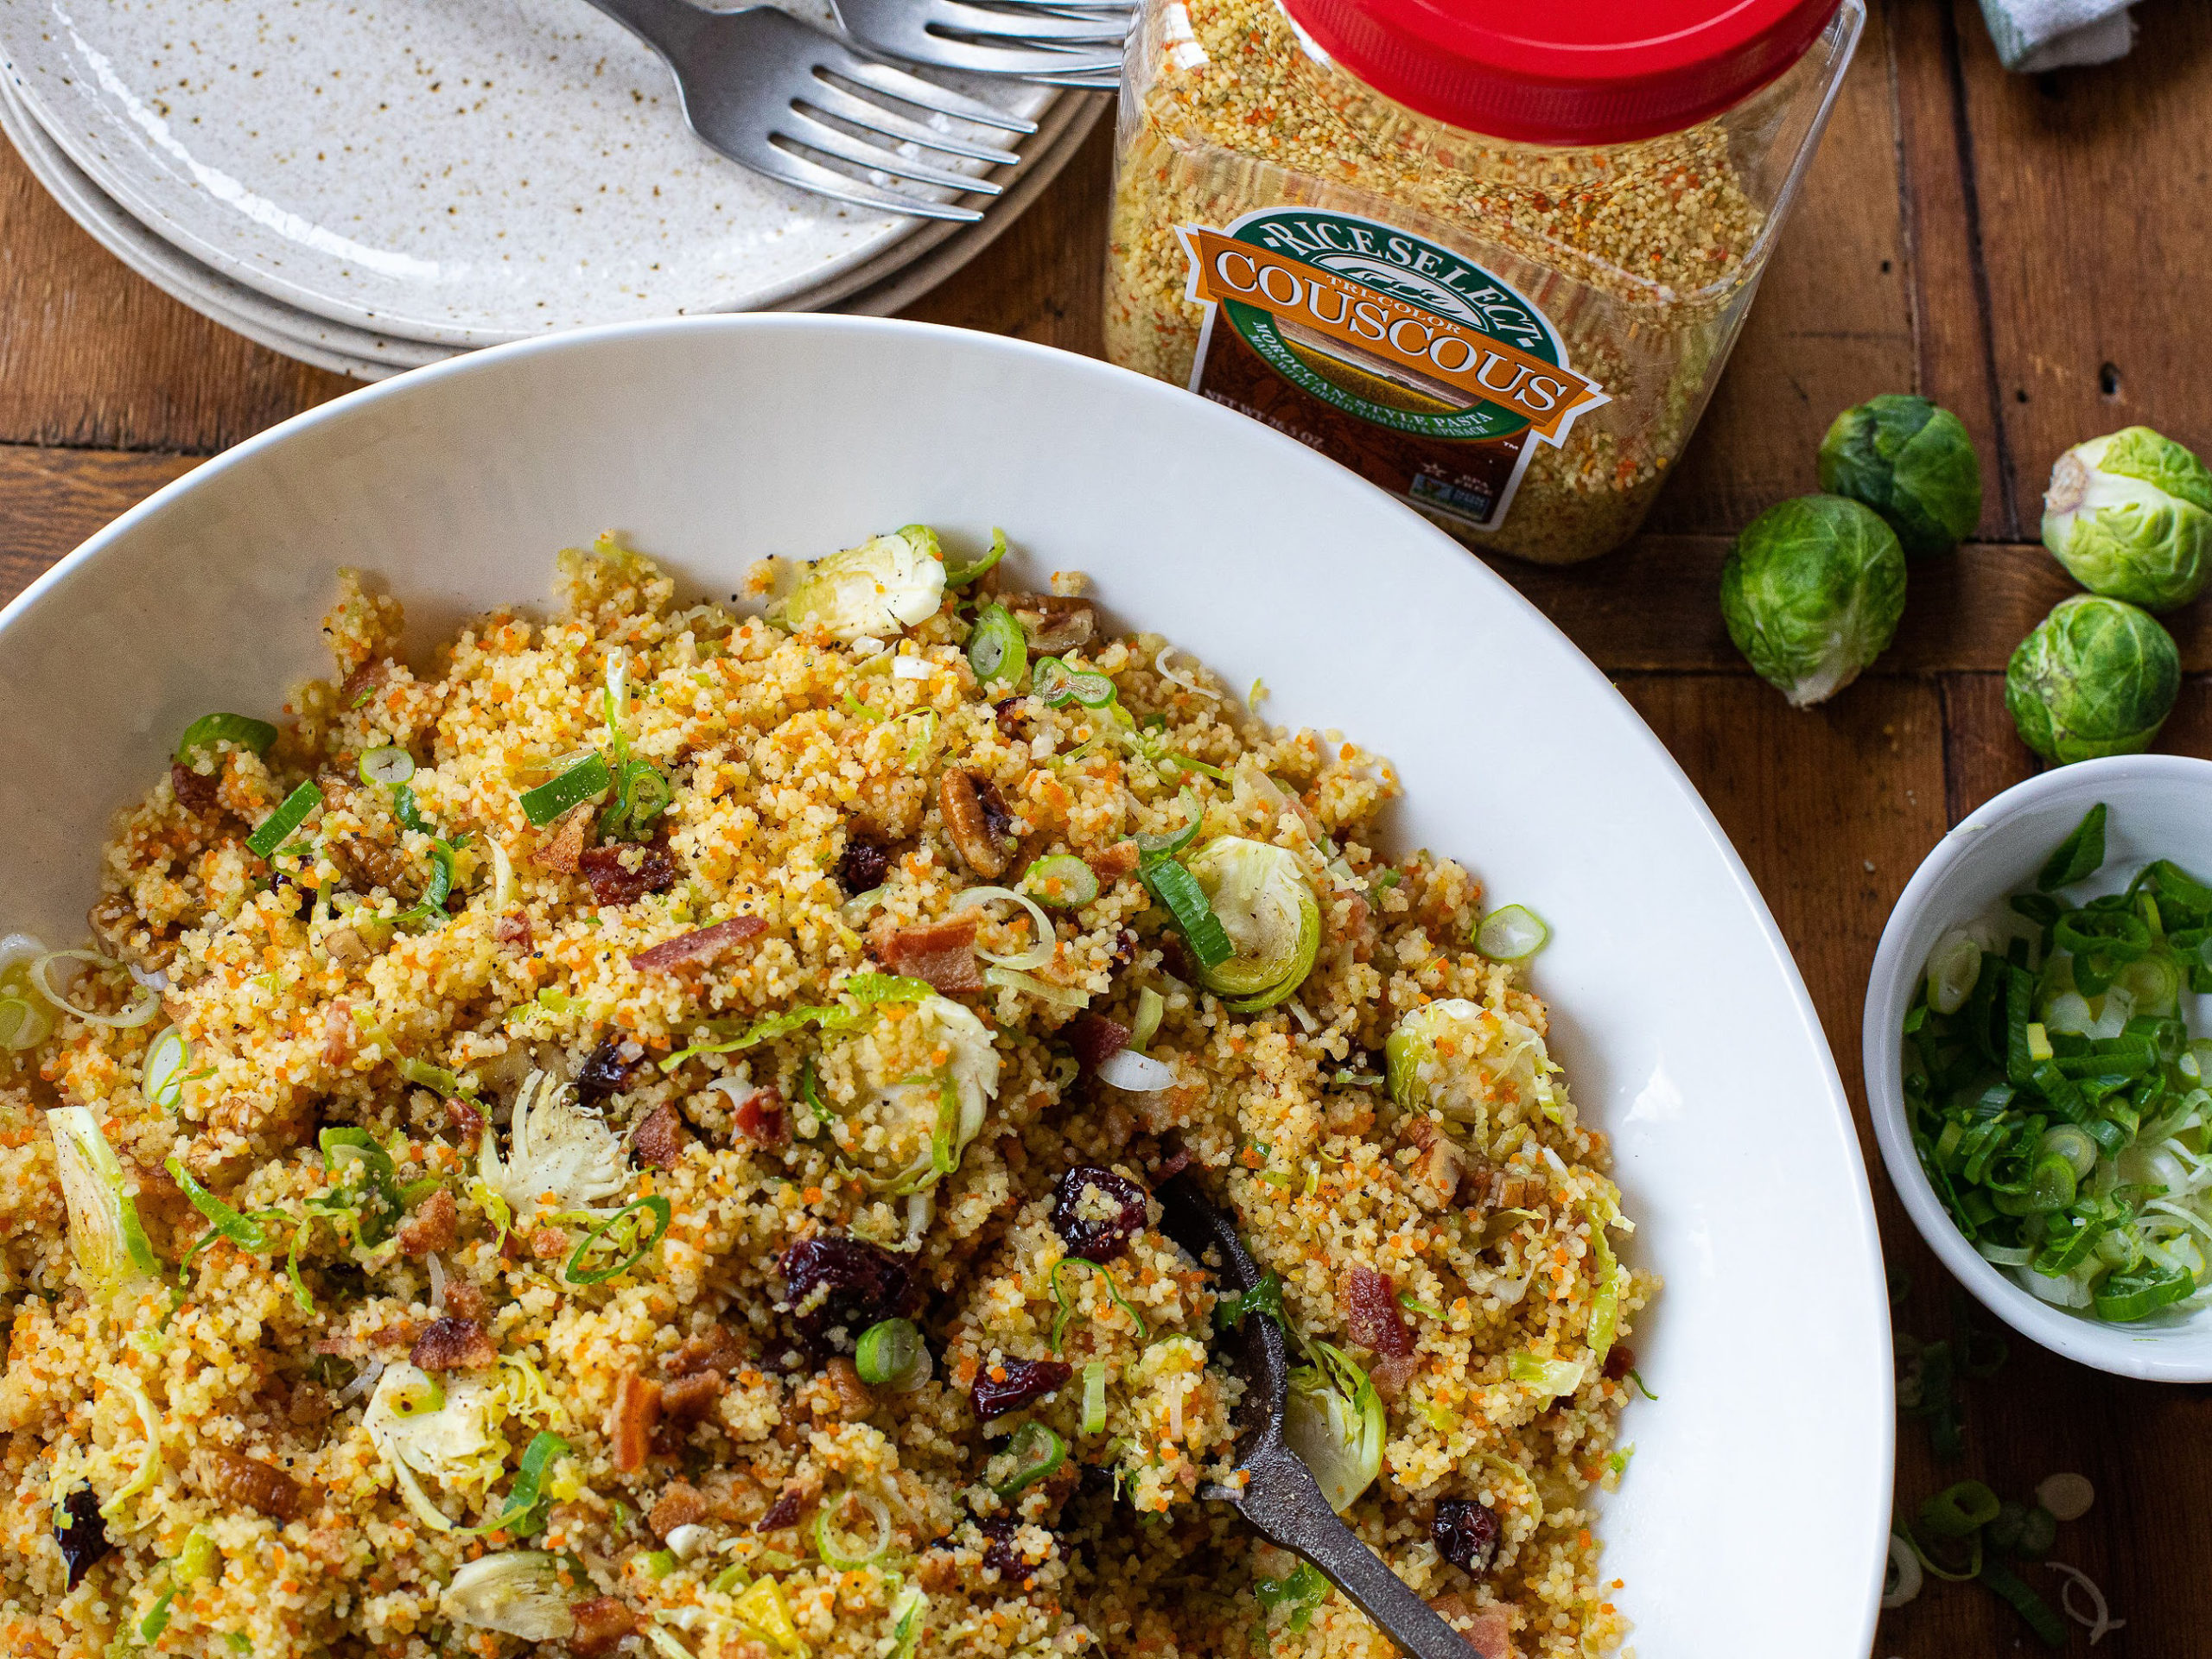 Stock Up On Your Favorite RiceSelect® Products - Save $2 With The Ibotta Offer At Publix on I Heart Publix